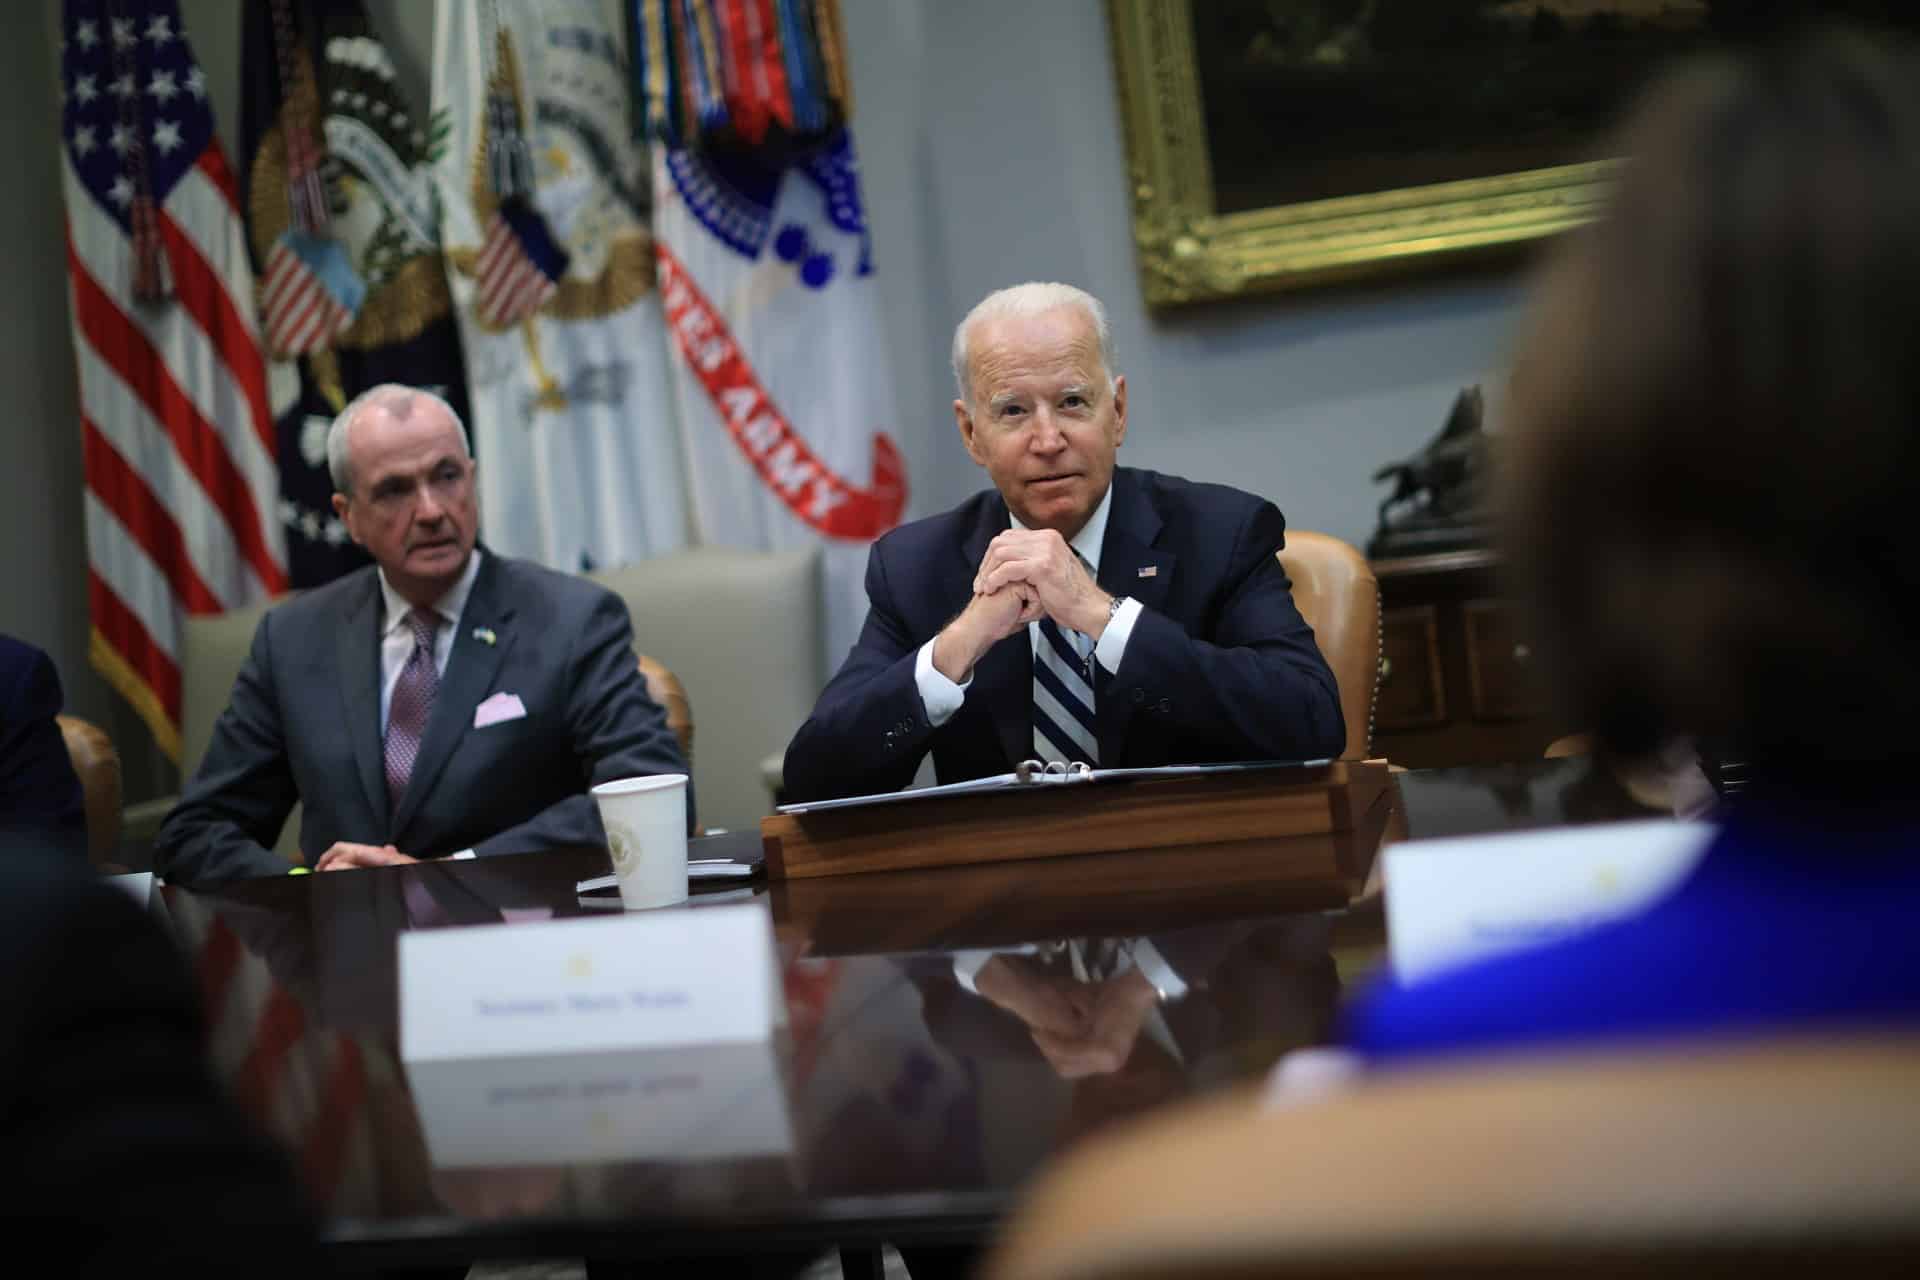 Poll: Over One-Third View Tuesday's Elections as
'Referendum' on Biden 1